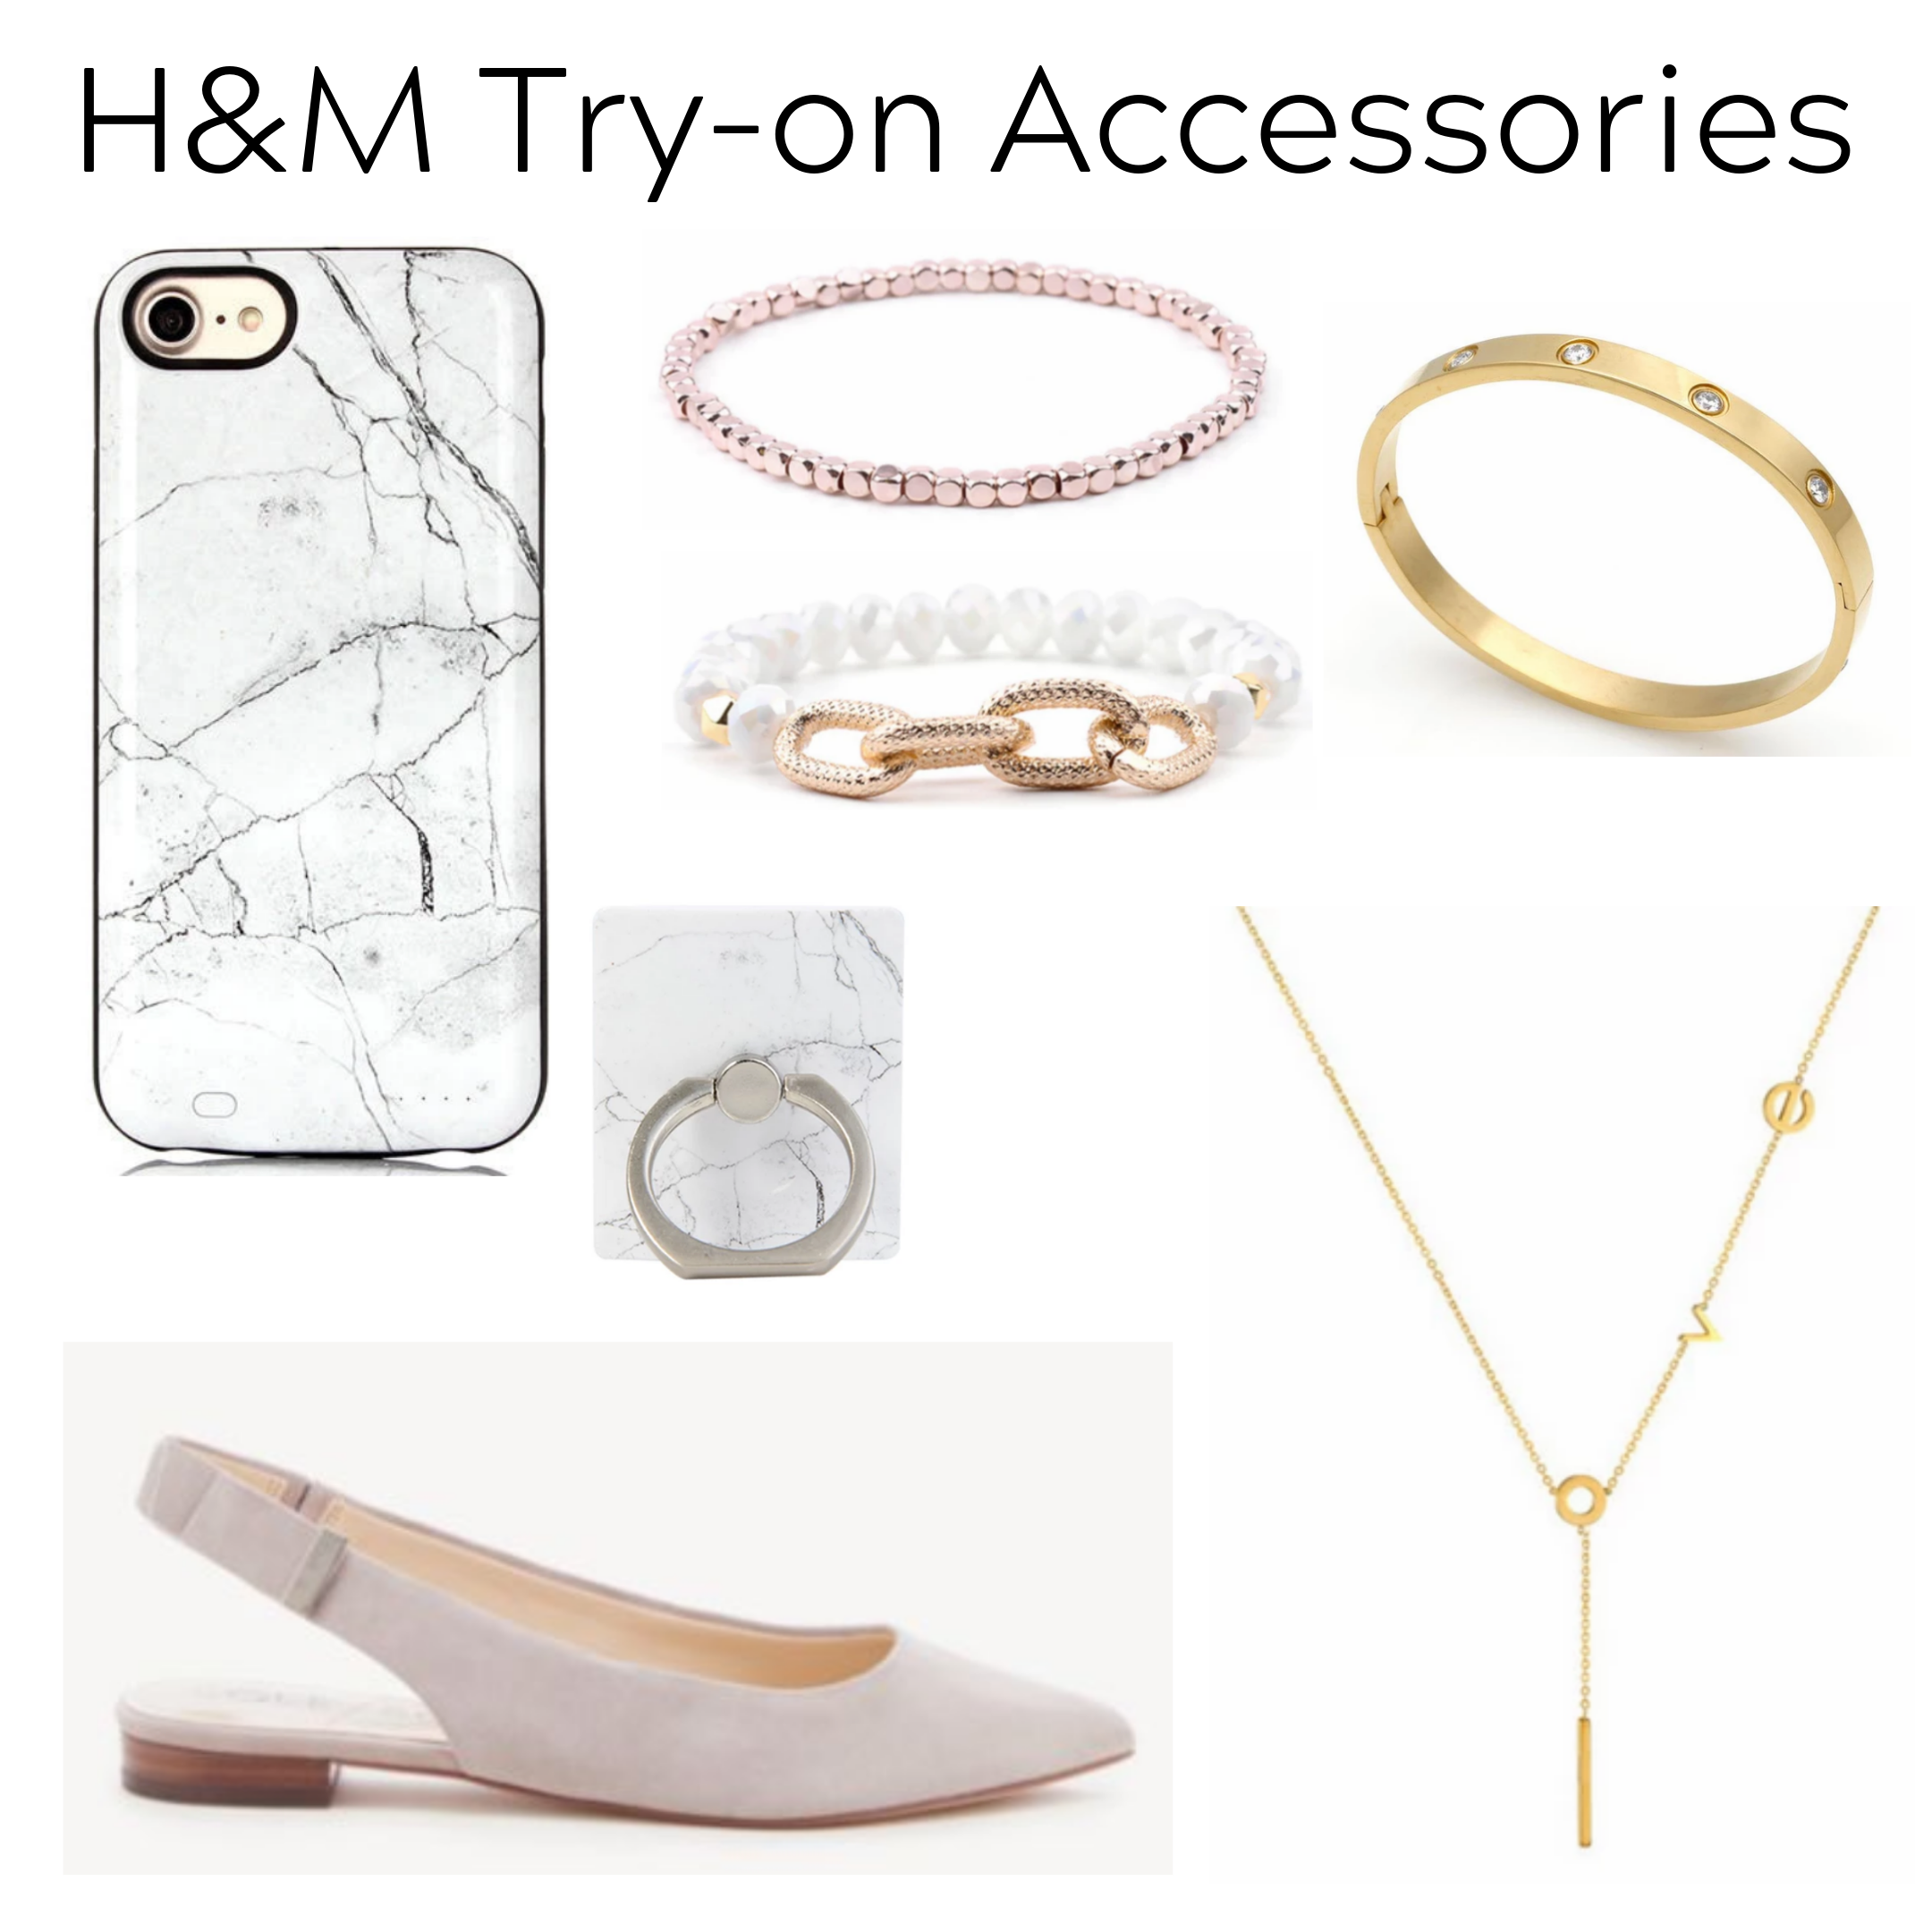 Try-on accessories